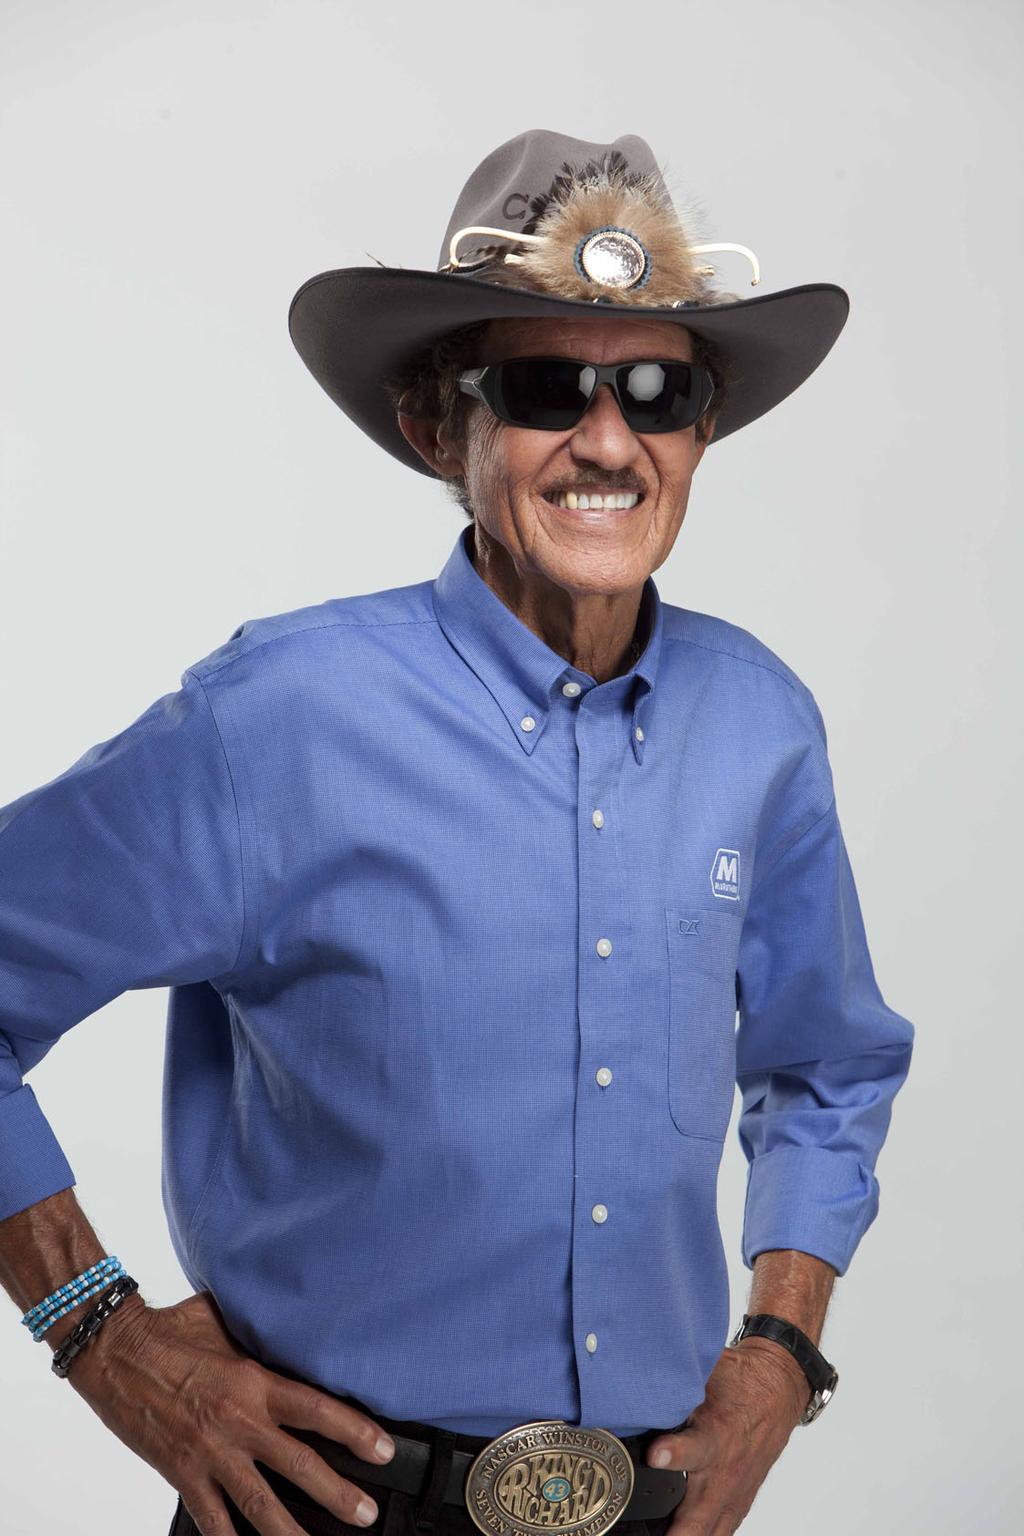 Marathon Petroleum Company Presents Richard Petty at the Marathon Classic presented by Owens Corning & O-I Thursday, July 17-- times to be announced The King, NASCAR Hall of Famer Richard Petty, will